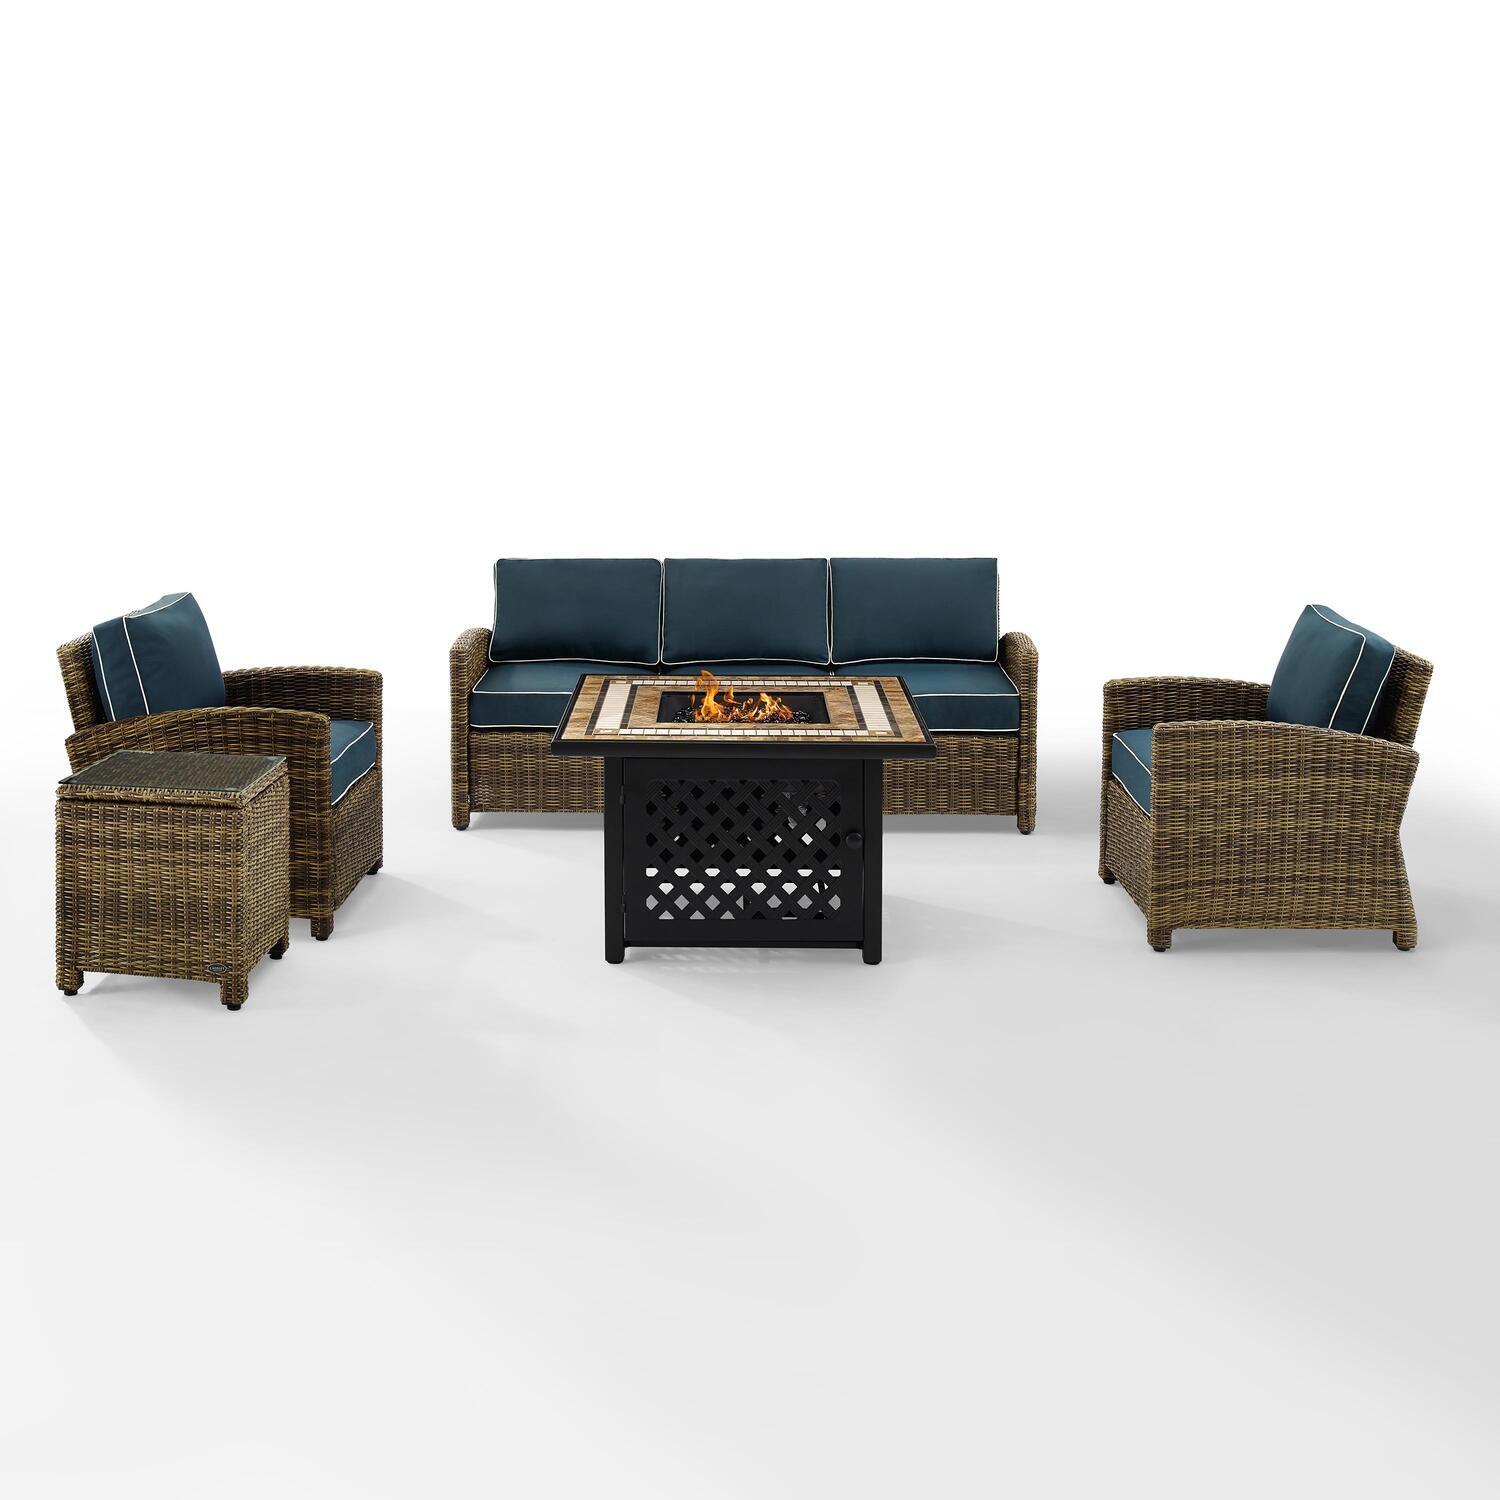 Crosley Furniture Bradenton 5Pc Patio Fabric Fire Pit Sofa Set in Brown and Navy - image 1 of 9